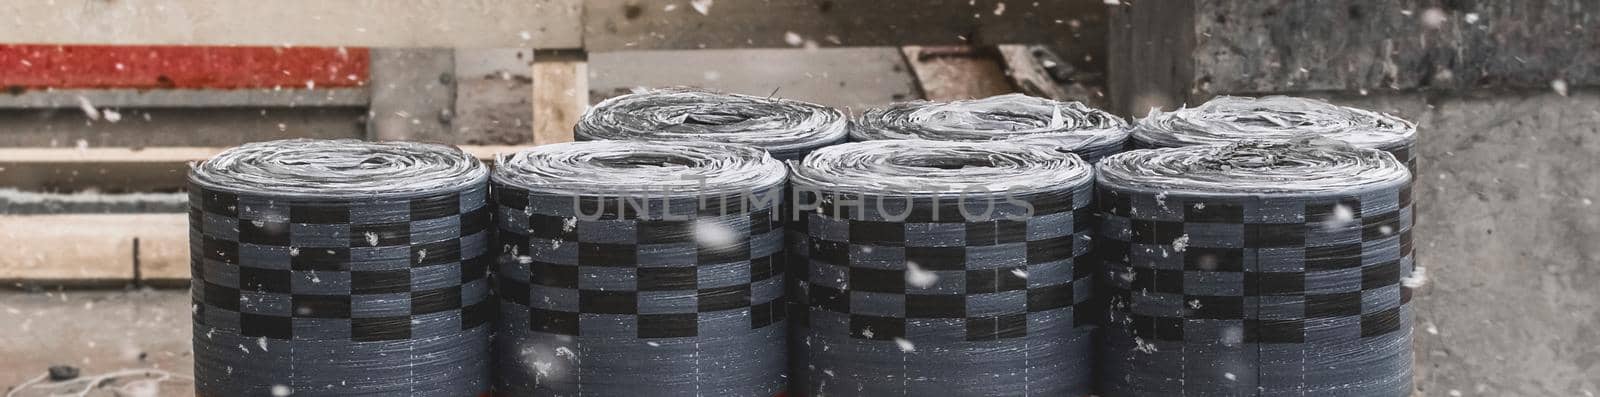 Pile of rolls of dark thermal insulation industrial materials storage outdoor on a construction site during a snowfall.